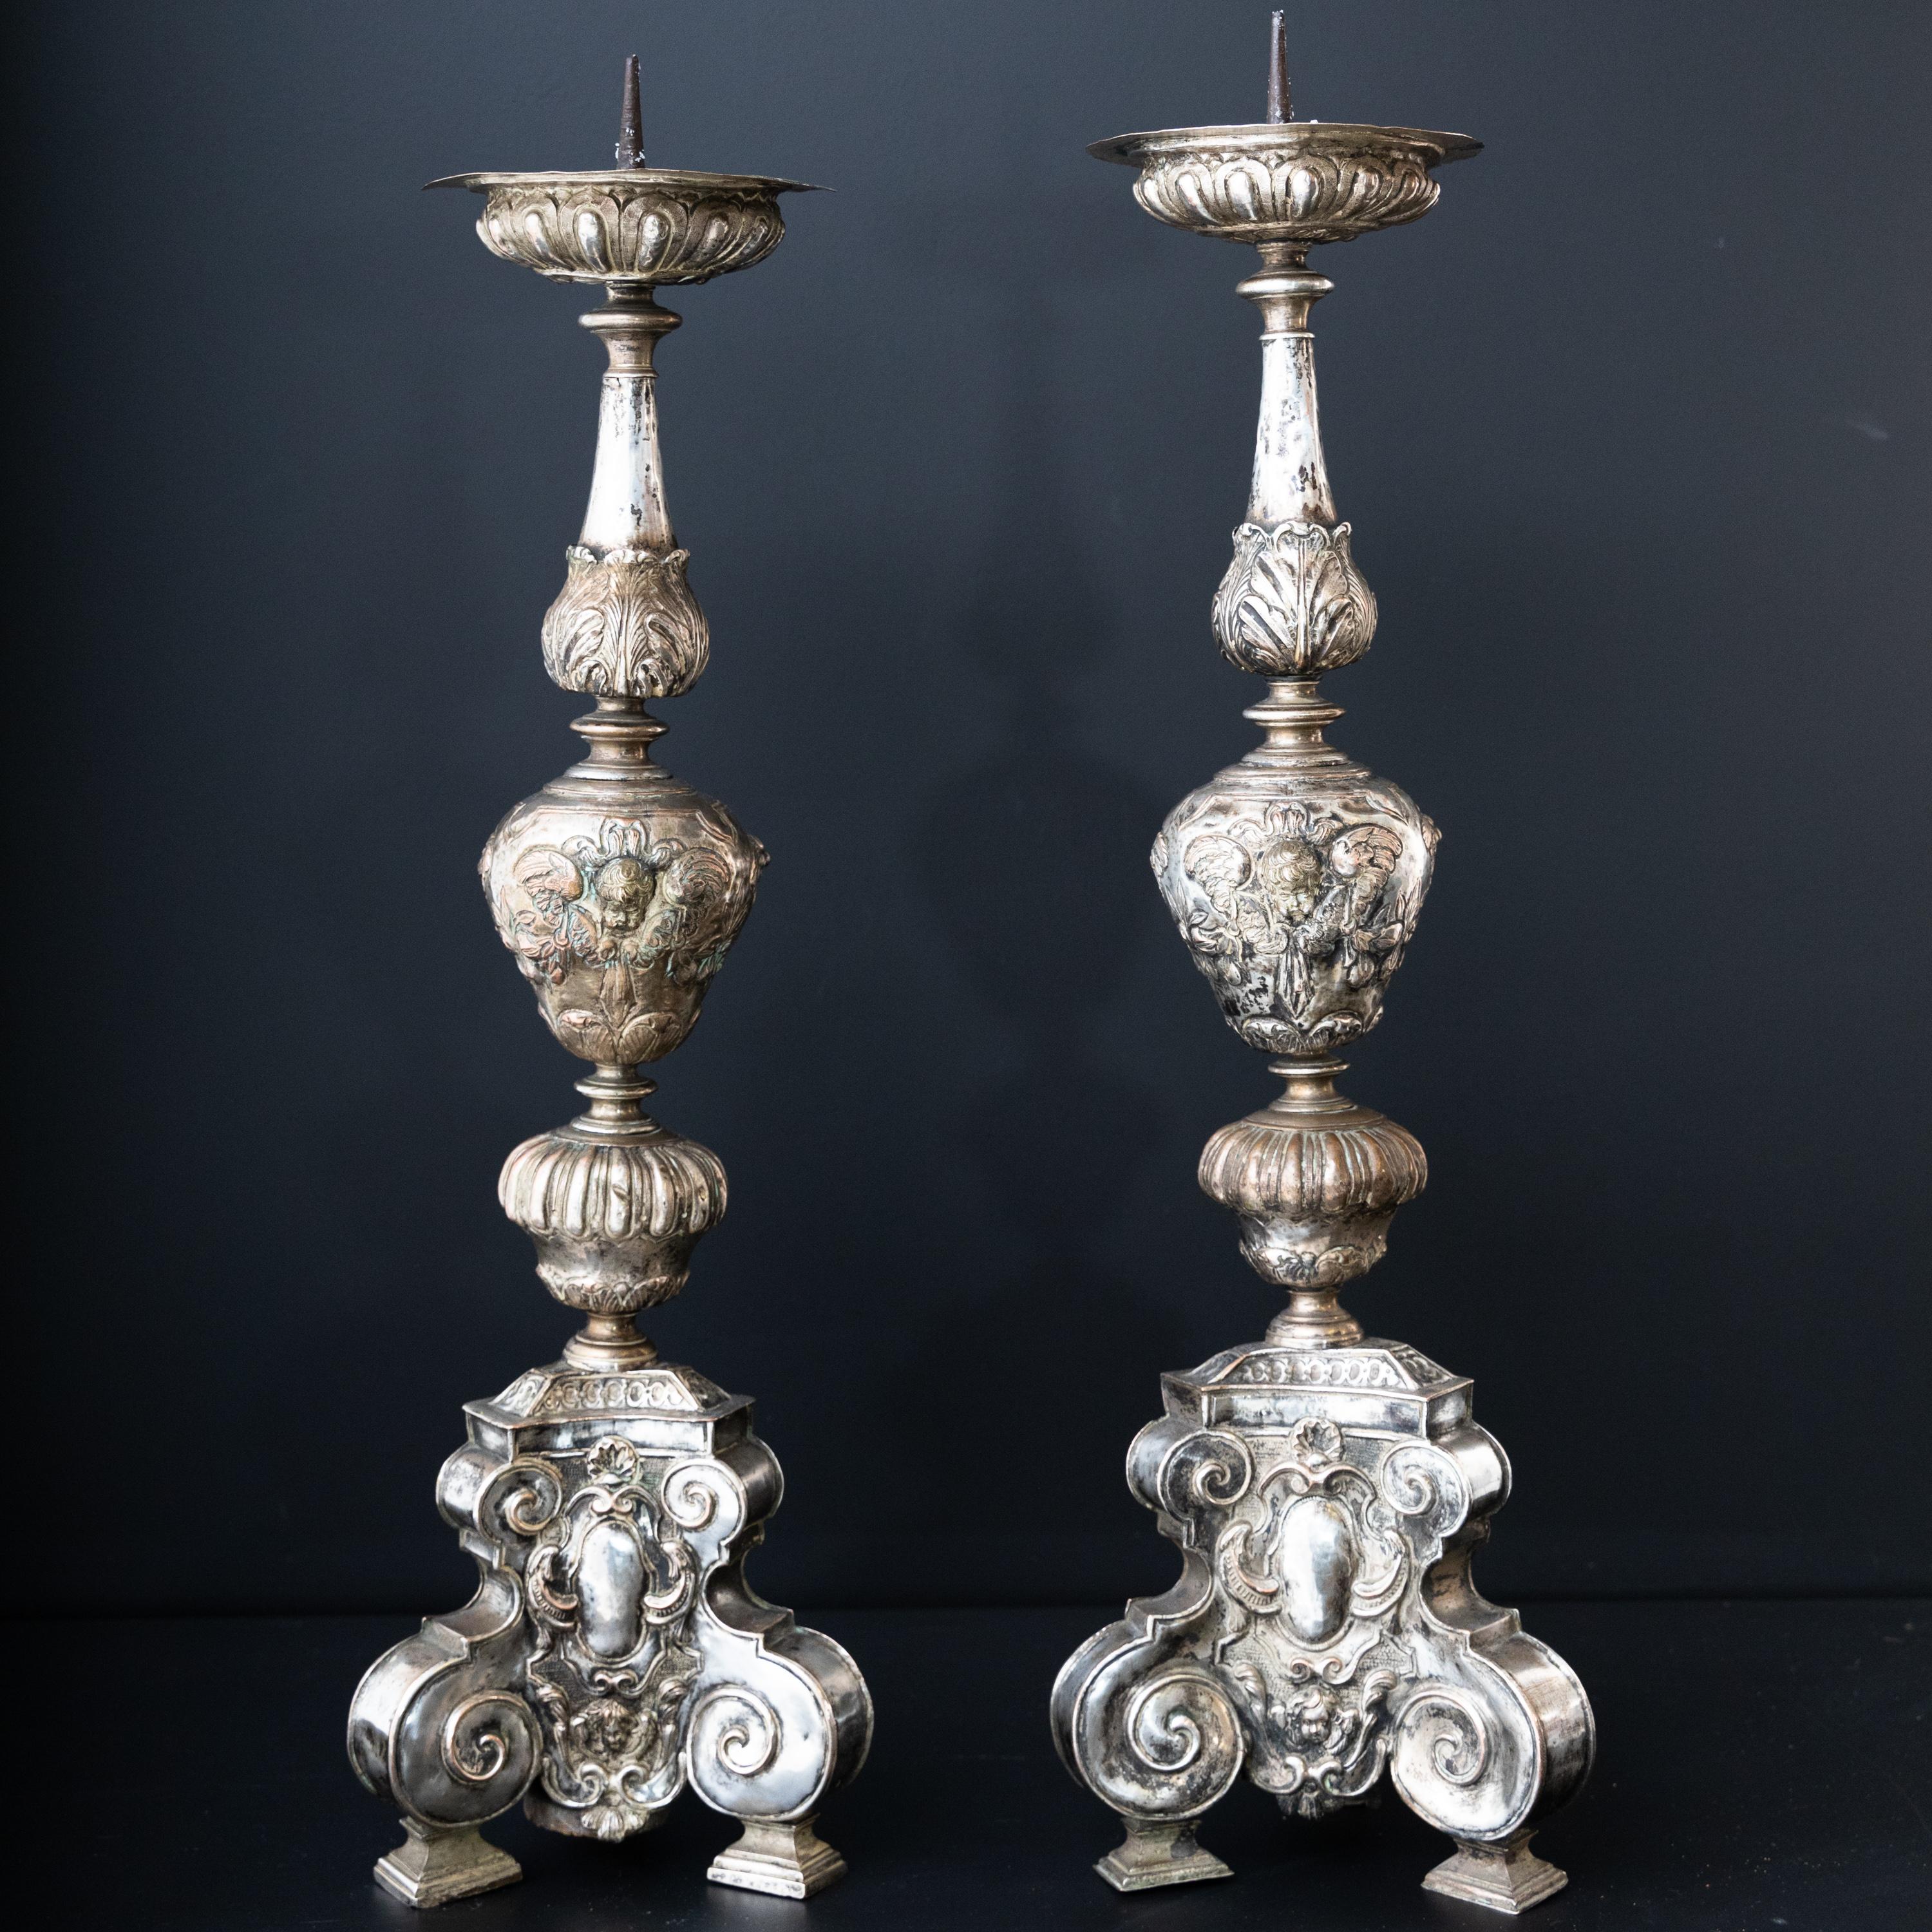 Pair of Silver-Plated Altar Candlesticks, Italy, 17th Century 3